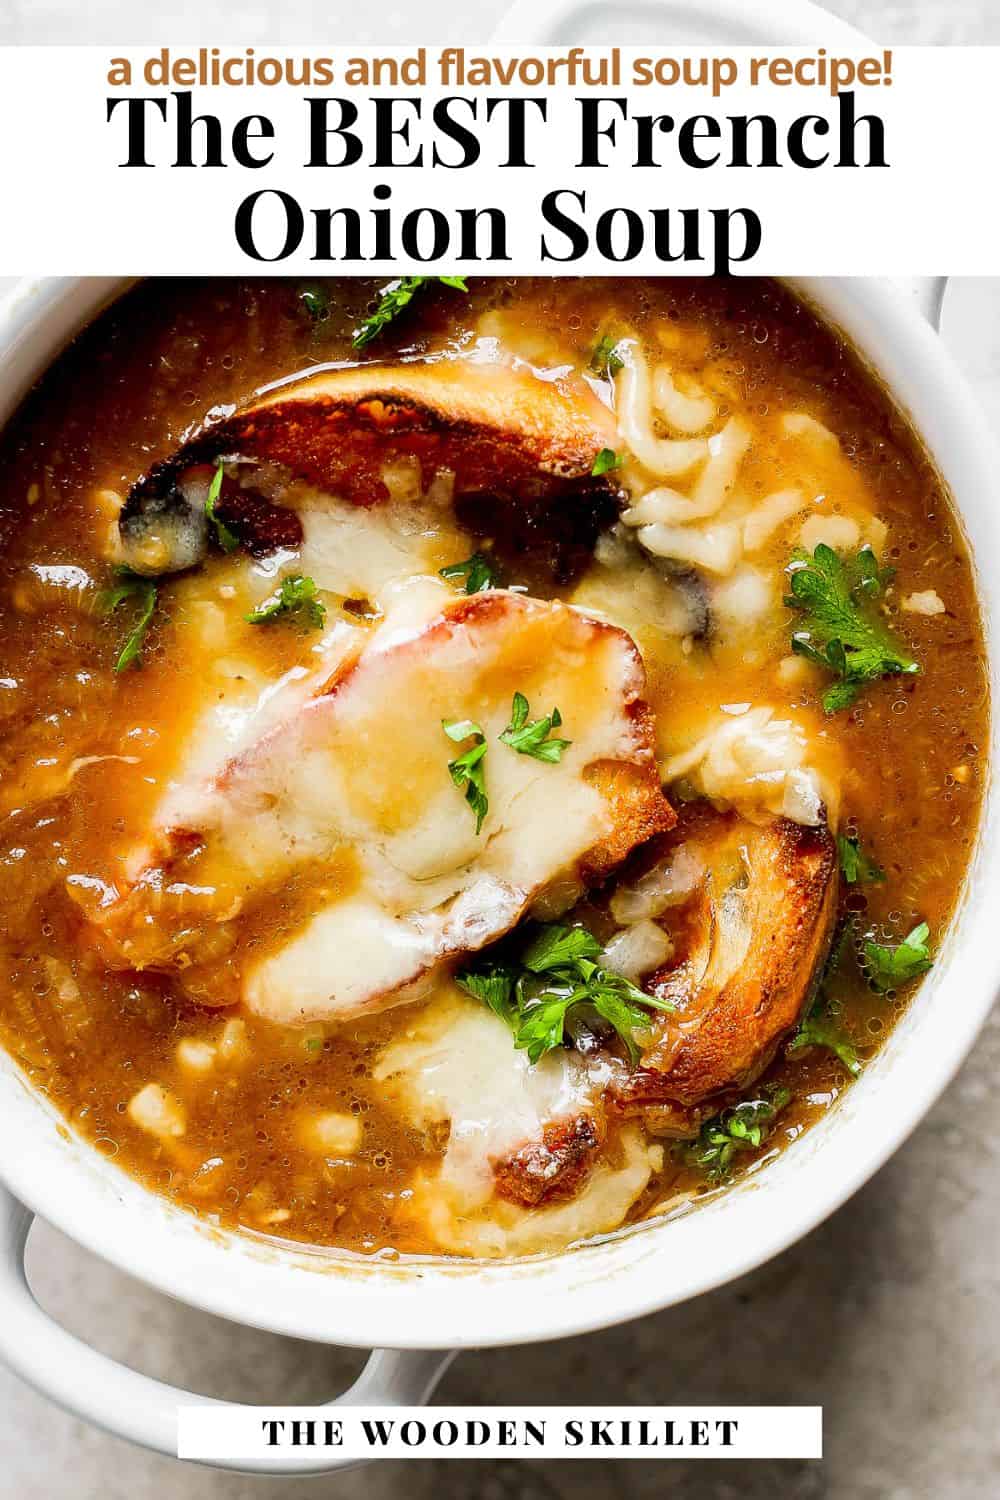 Pinterest image showing french onion soup in a bowl with the title "The Best French onion soup. A delicious and flavorful soup recipe".